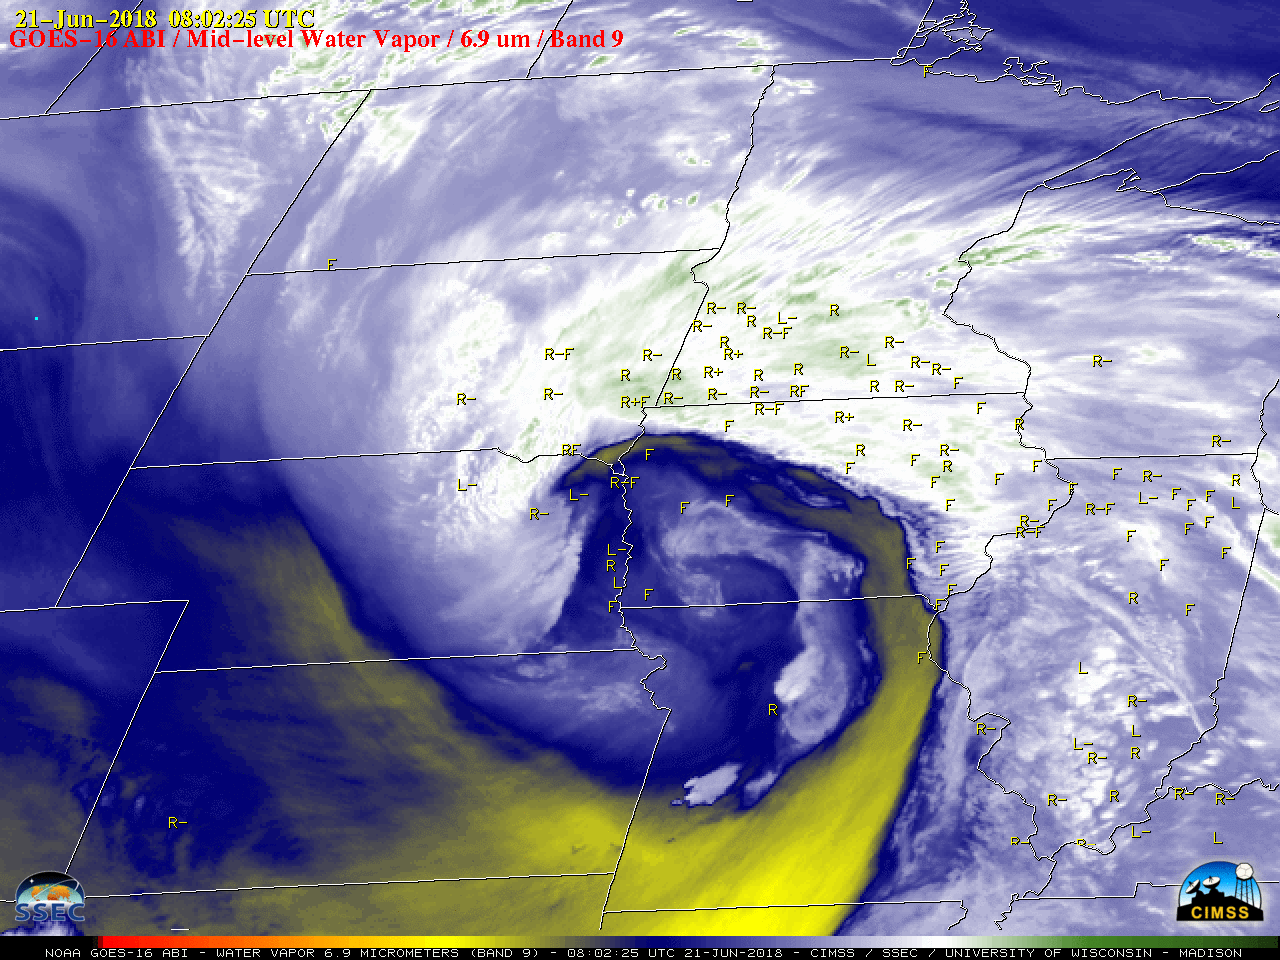 GOES-16 Mid-level Water Vapor (6.9 µm) images, with hourly plots of surface weather type [click to play MP4 animation]